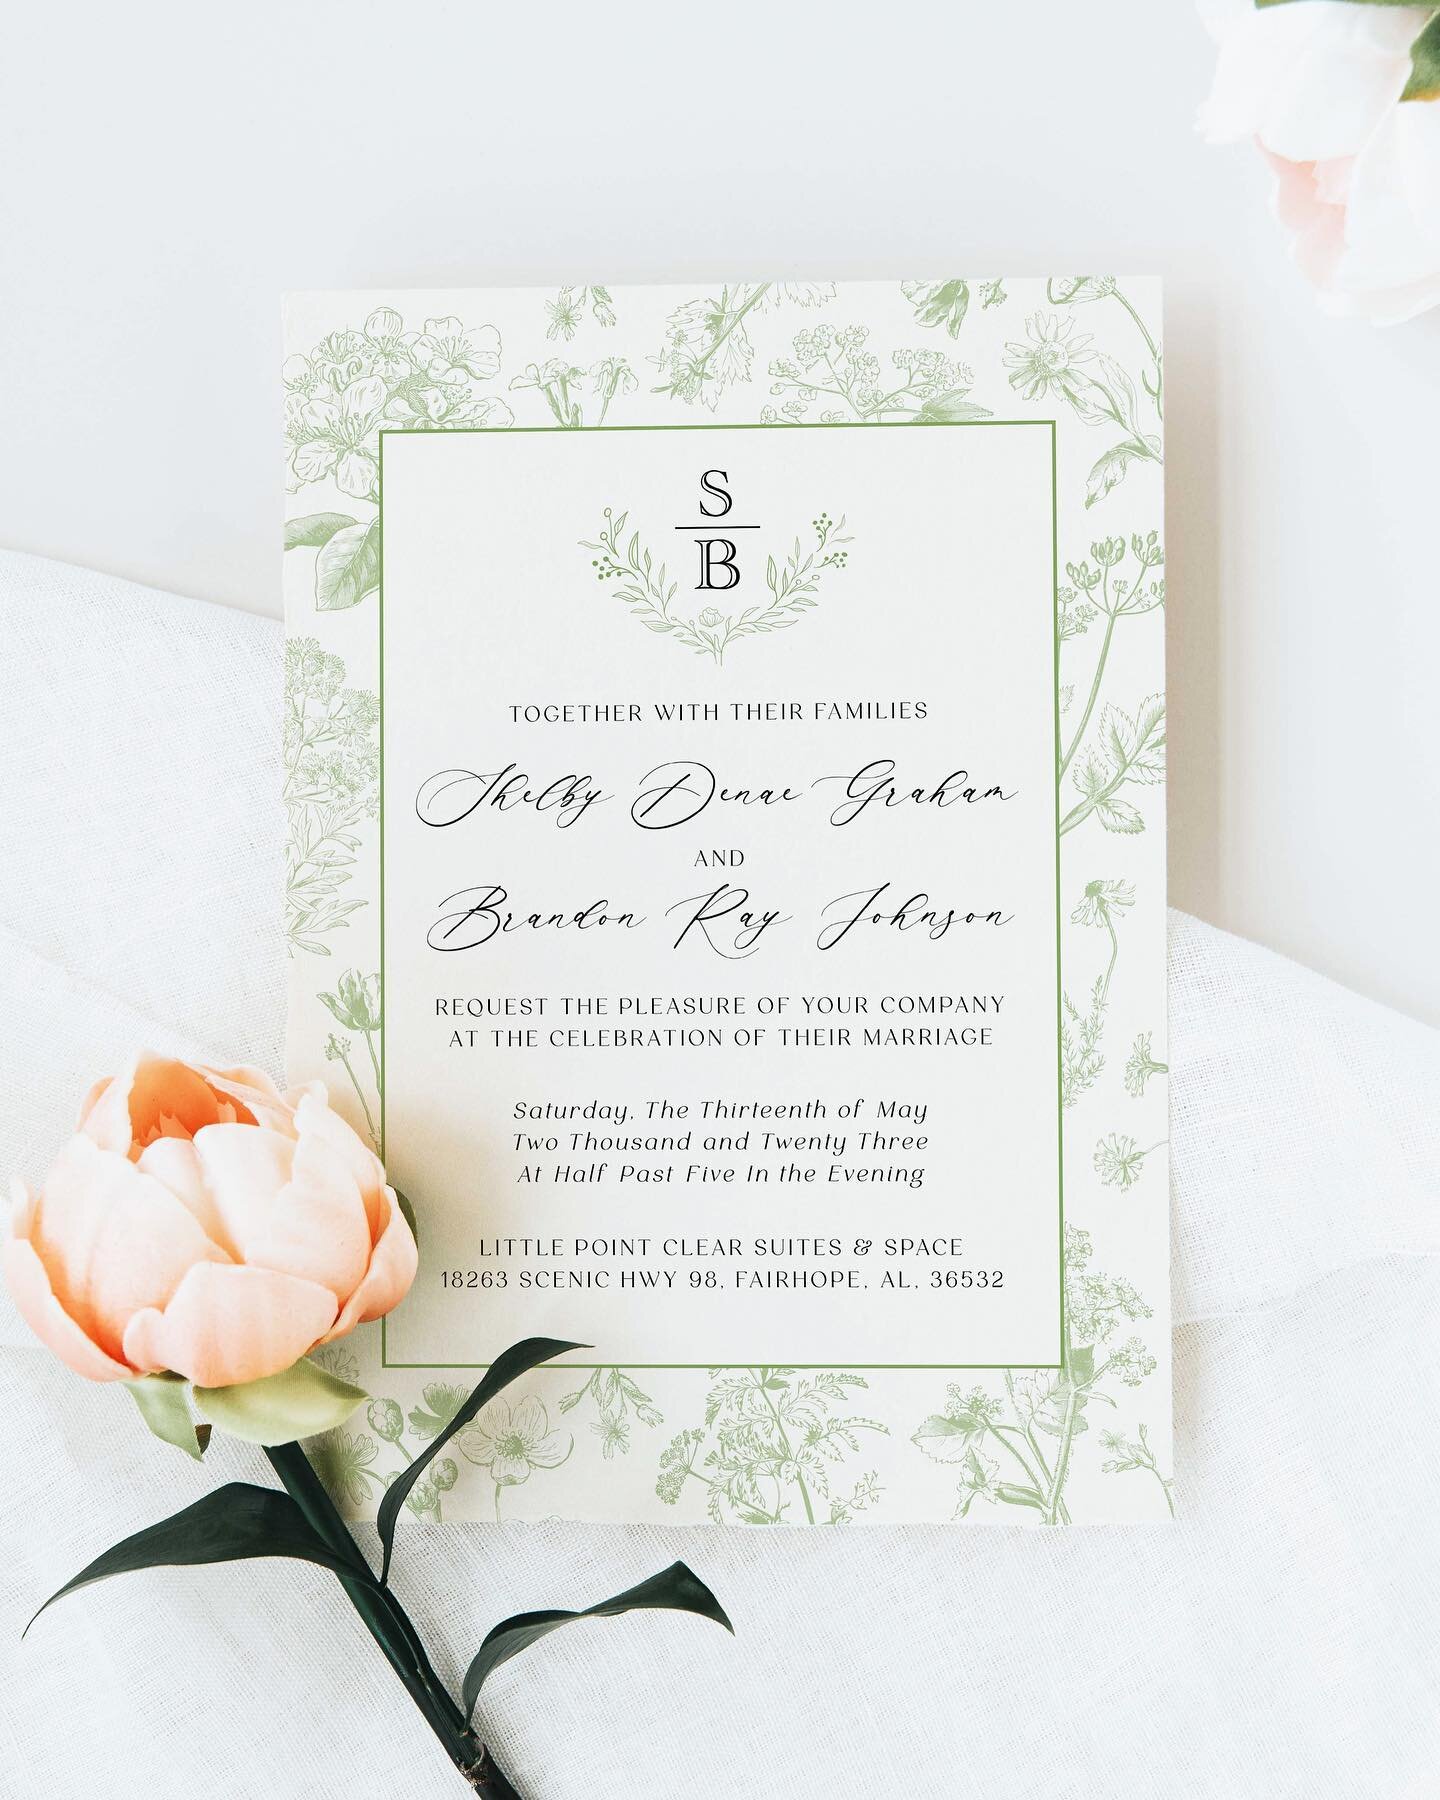 It was an absolute JOY designing this wedding stationery suite for the beautiful bride to be @shelbydenae 💒💗

#weddinginvitations #weddingstationery #springwedding #floralillustration #vintagebotanical #maywedding